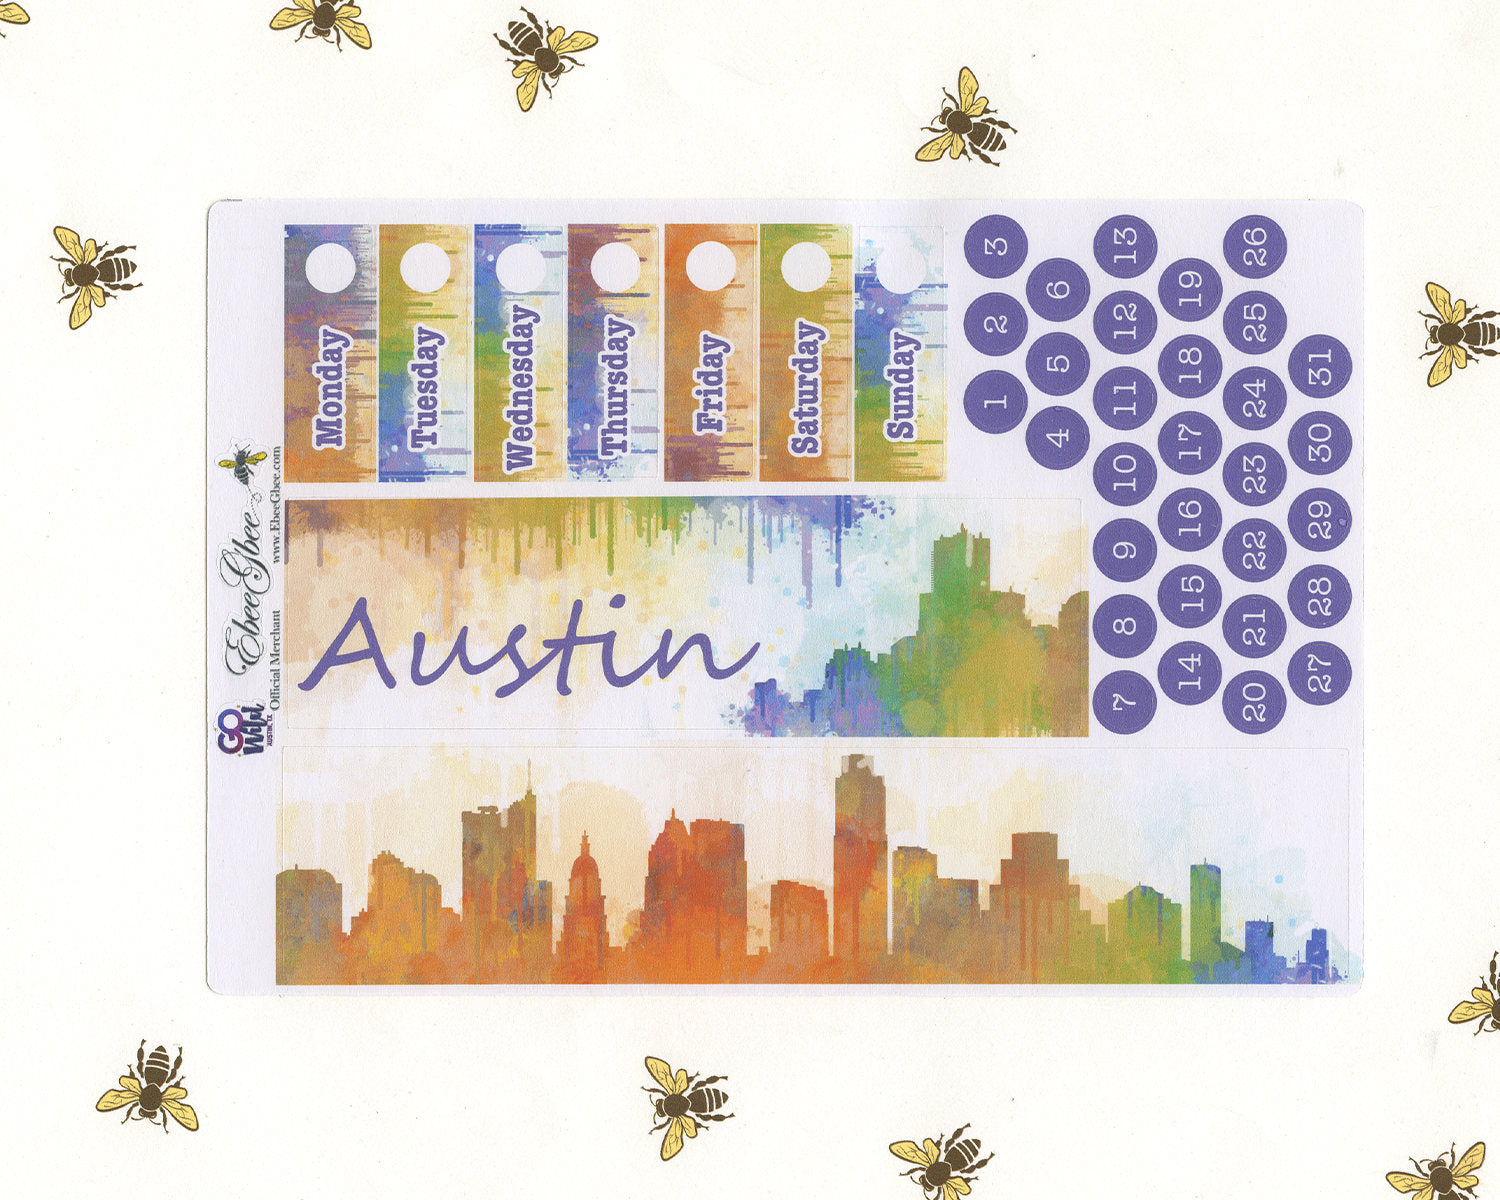 A LA CART Go Wild FUNCTIONAL Weekly Planner Sticker Sheets | Made to Fit Erin Condren Vertical Planners